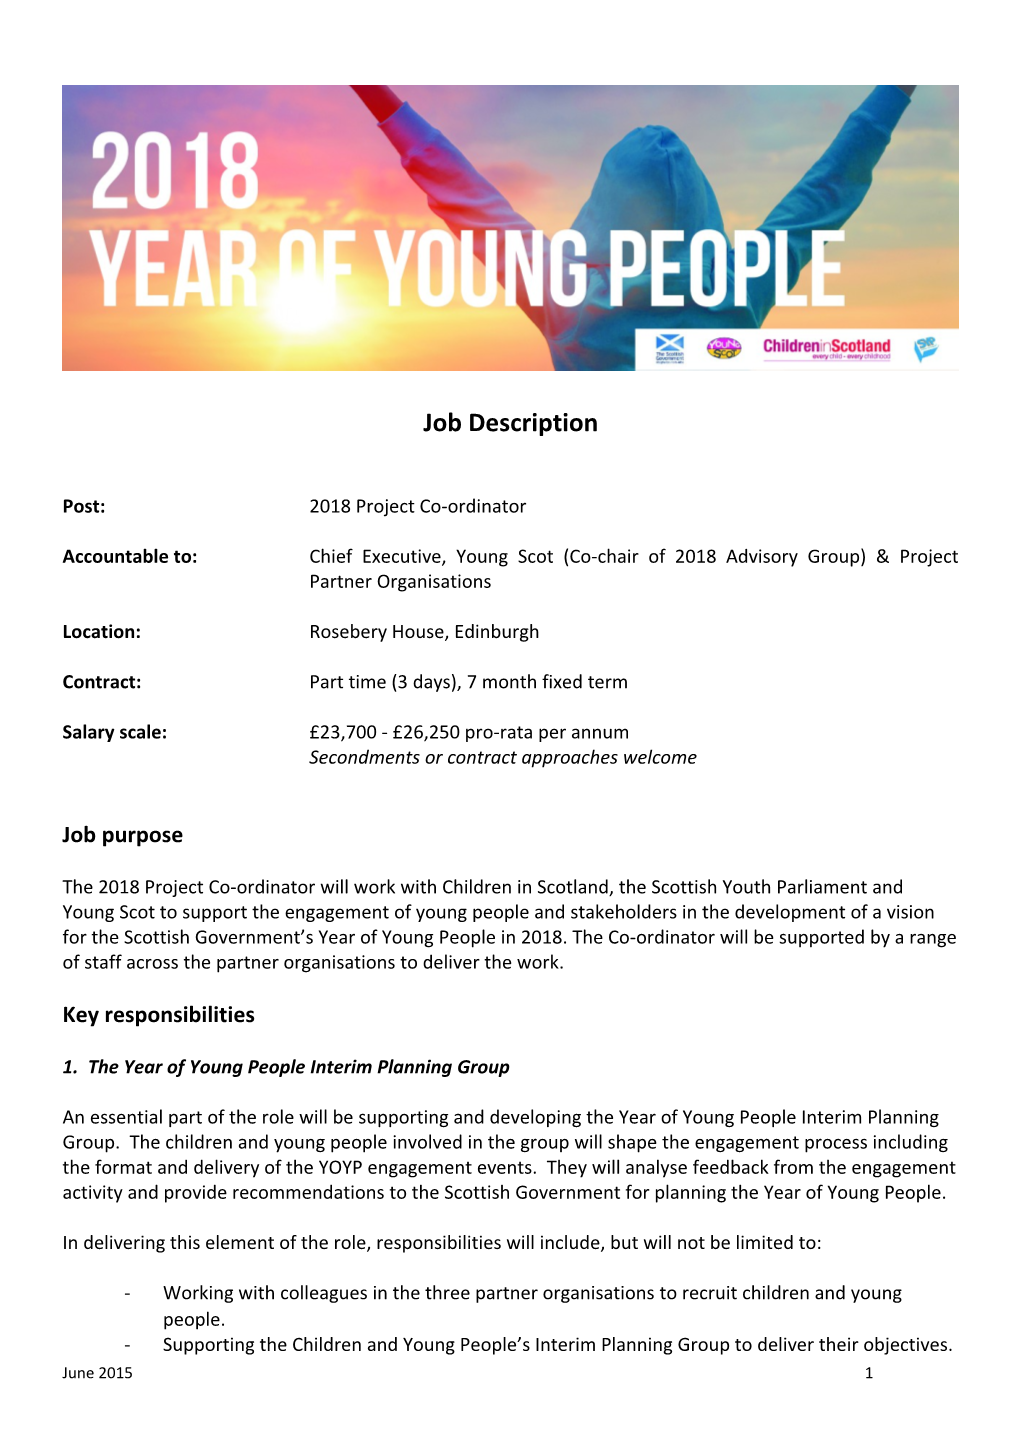 Accountable To: Chief Executive, Young Scot (Co-Chair of 2018 Advisory Group) & Project